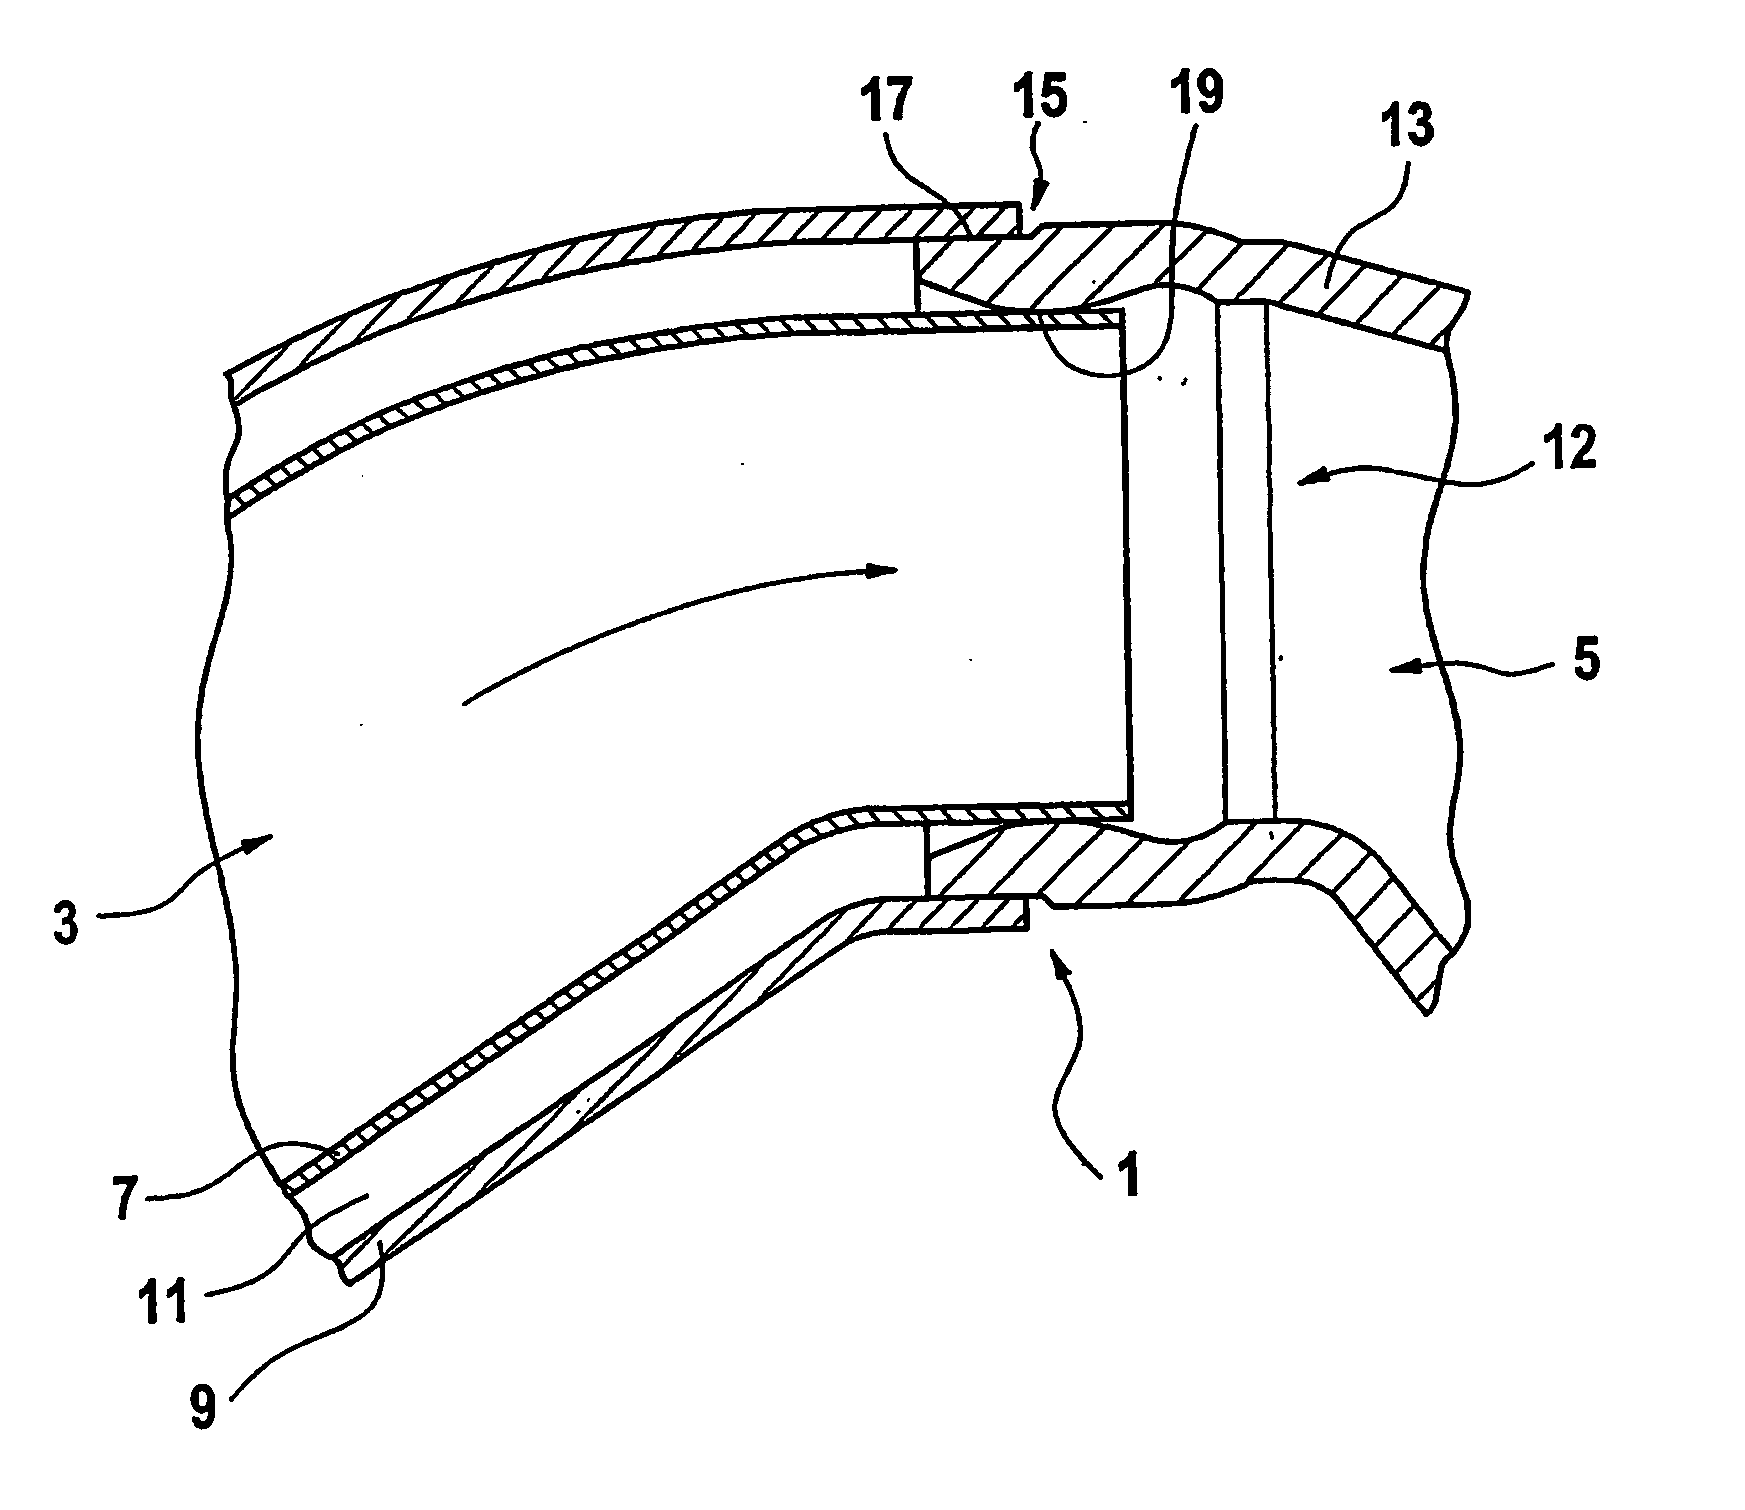 Method for Connecting a Sheet Metal Component, Such as a Pipe, to a Cast Metal Component, Such as a Housing Port, in Particular for an Exhaust System